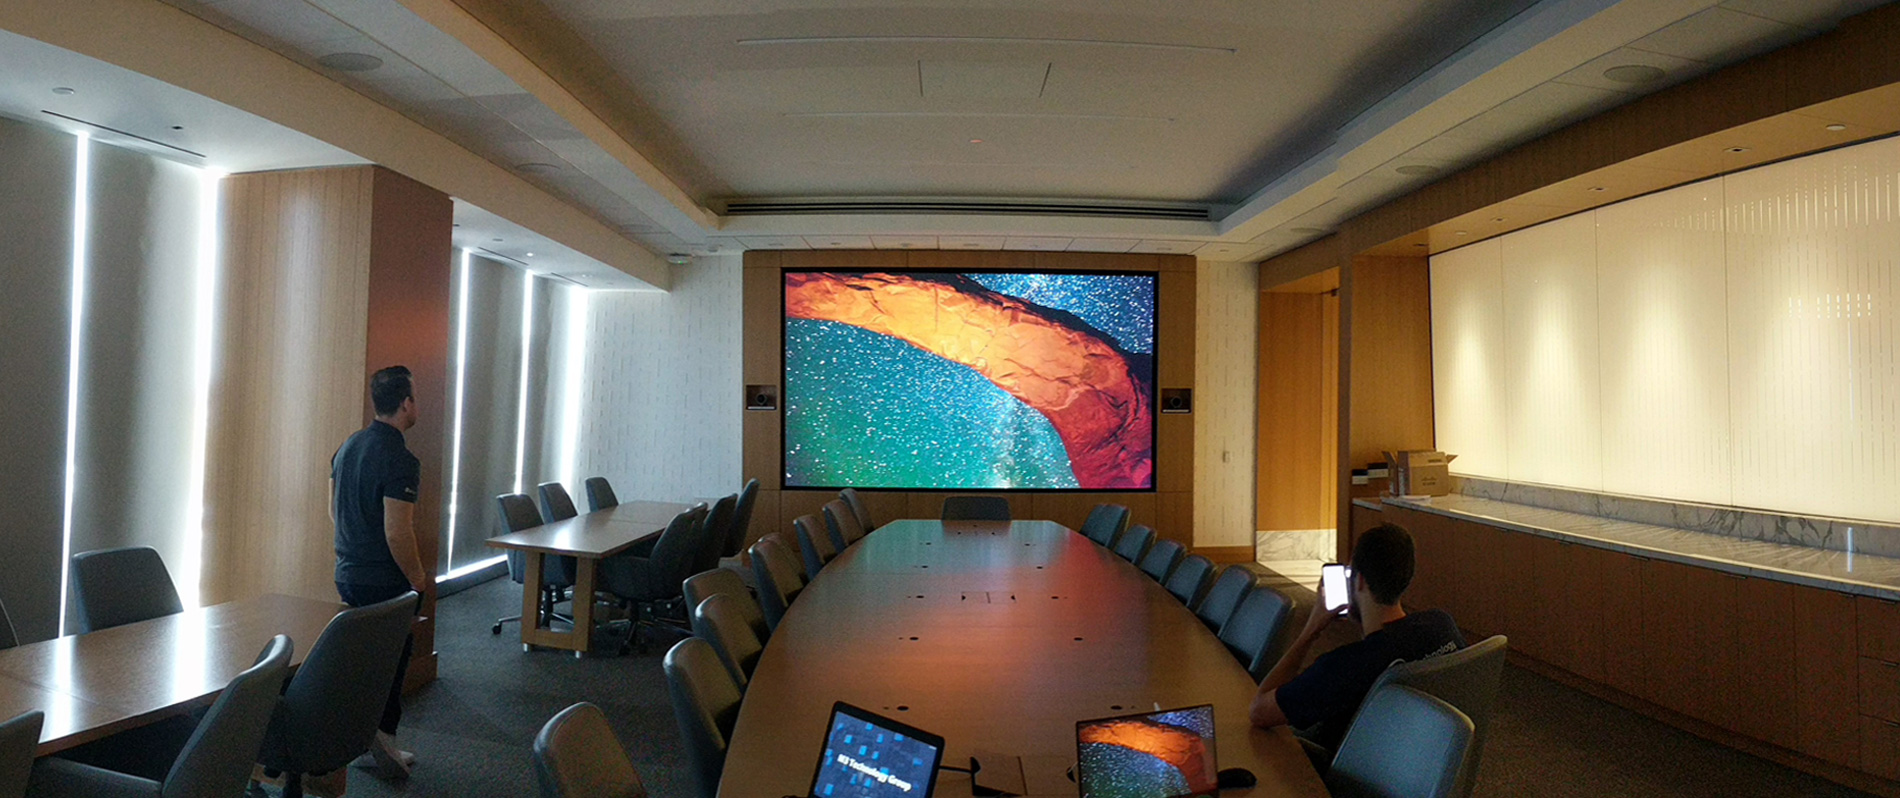 conference-room-with-large-screen-and-monitors-on-table